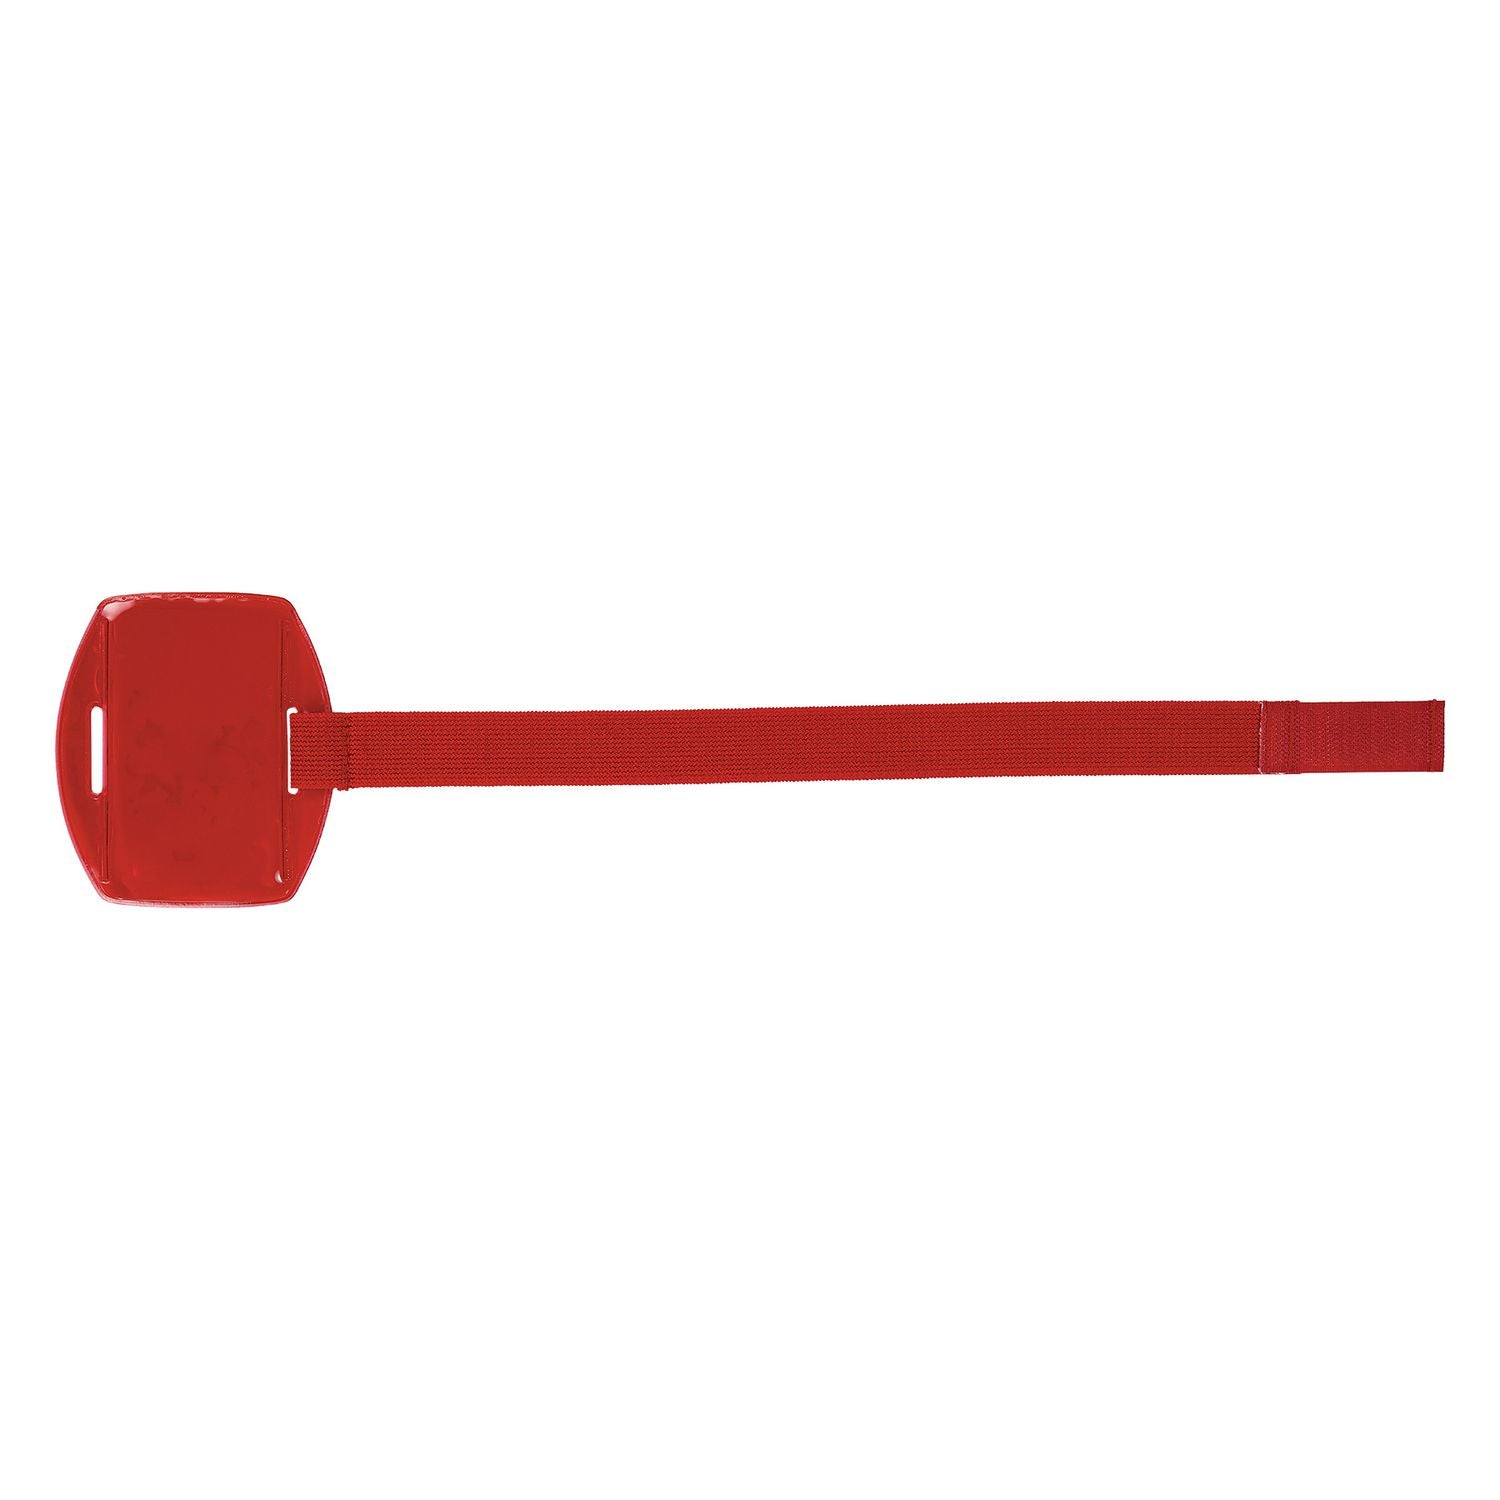 squids-3386-arm-band-id-badge-holder-vertical-red-375-x-425-holder-25-x-4-insert-ships-in-1-3-business-days_ego19955 - 2